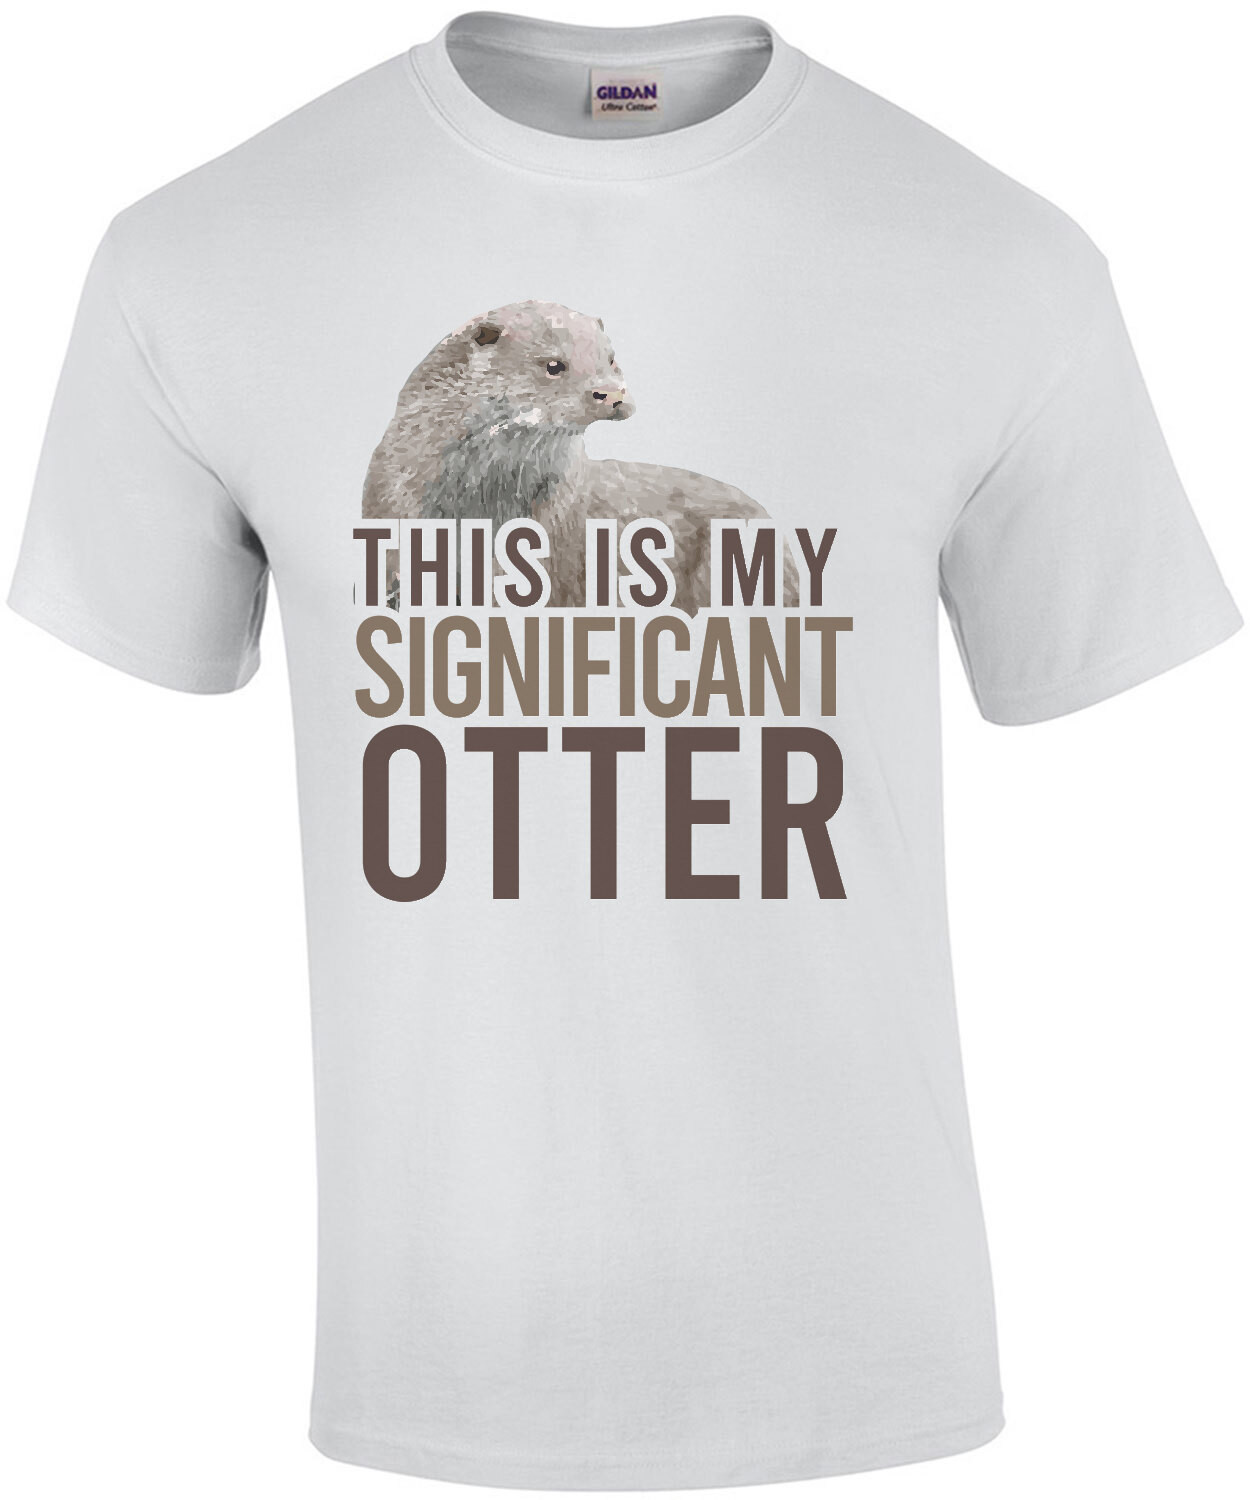 This is my significant otter - funny pun t-shirt